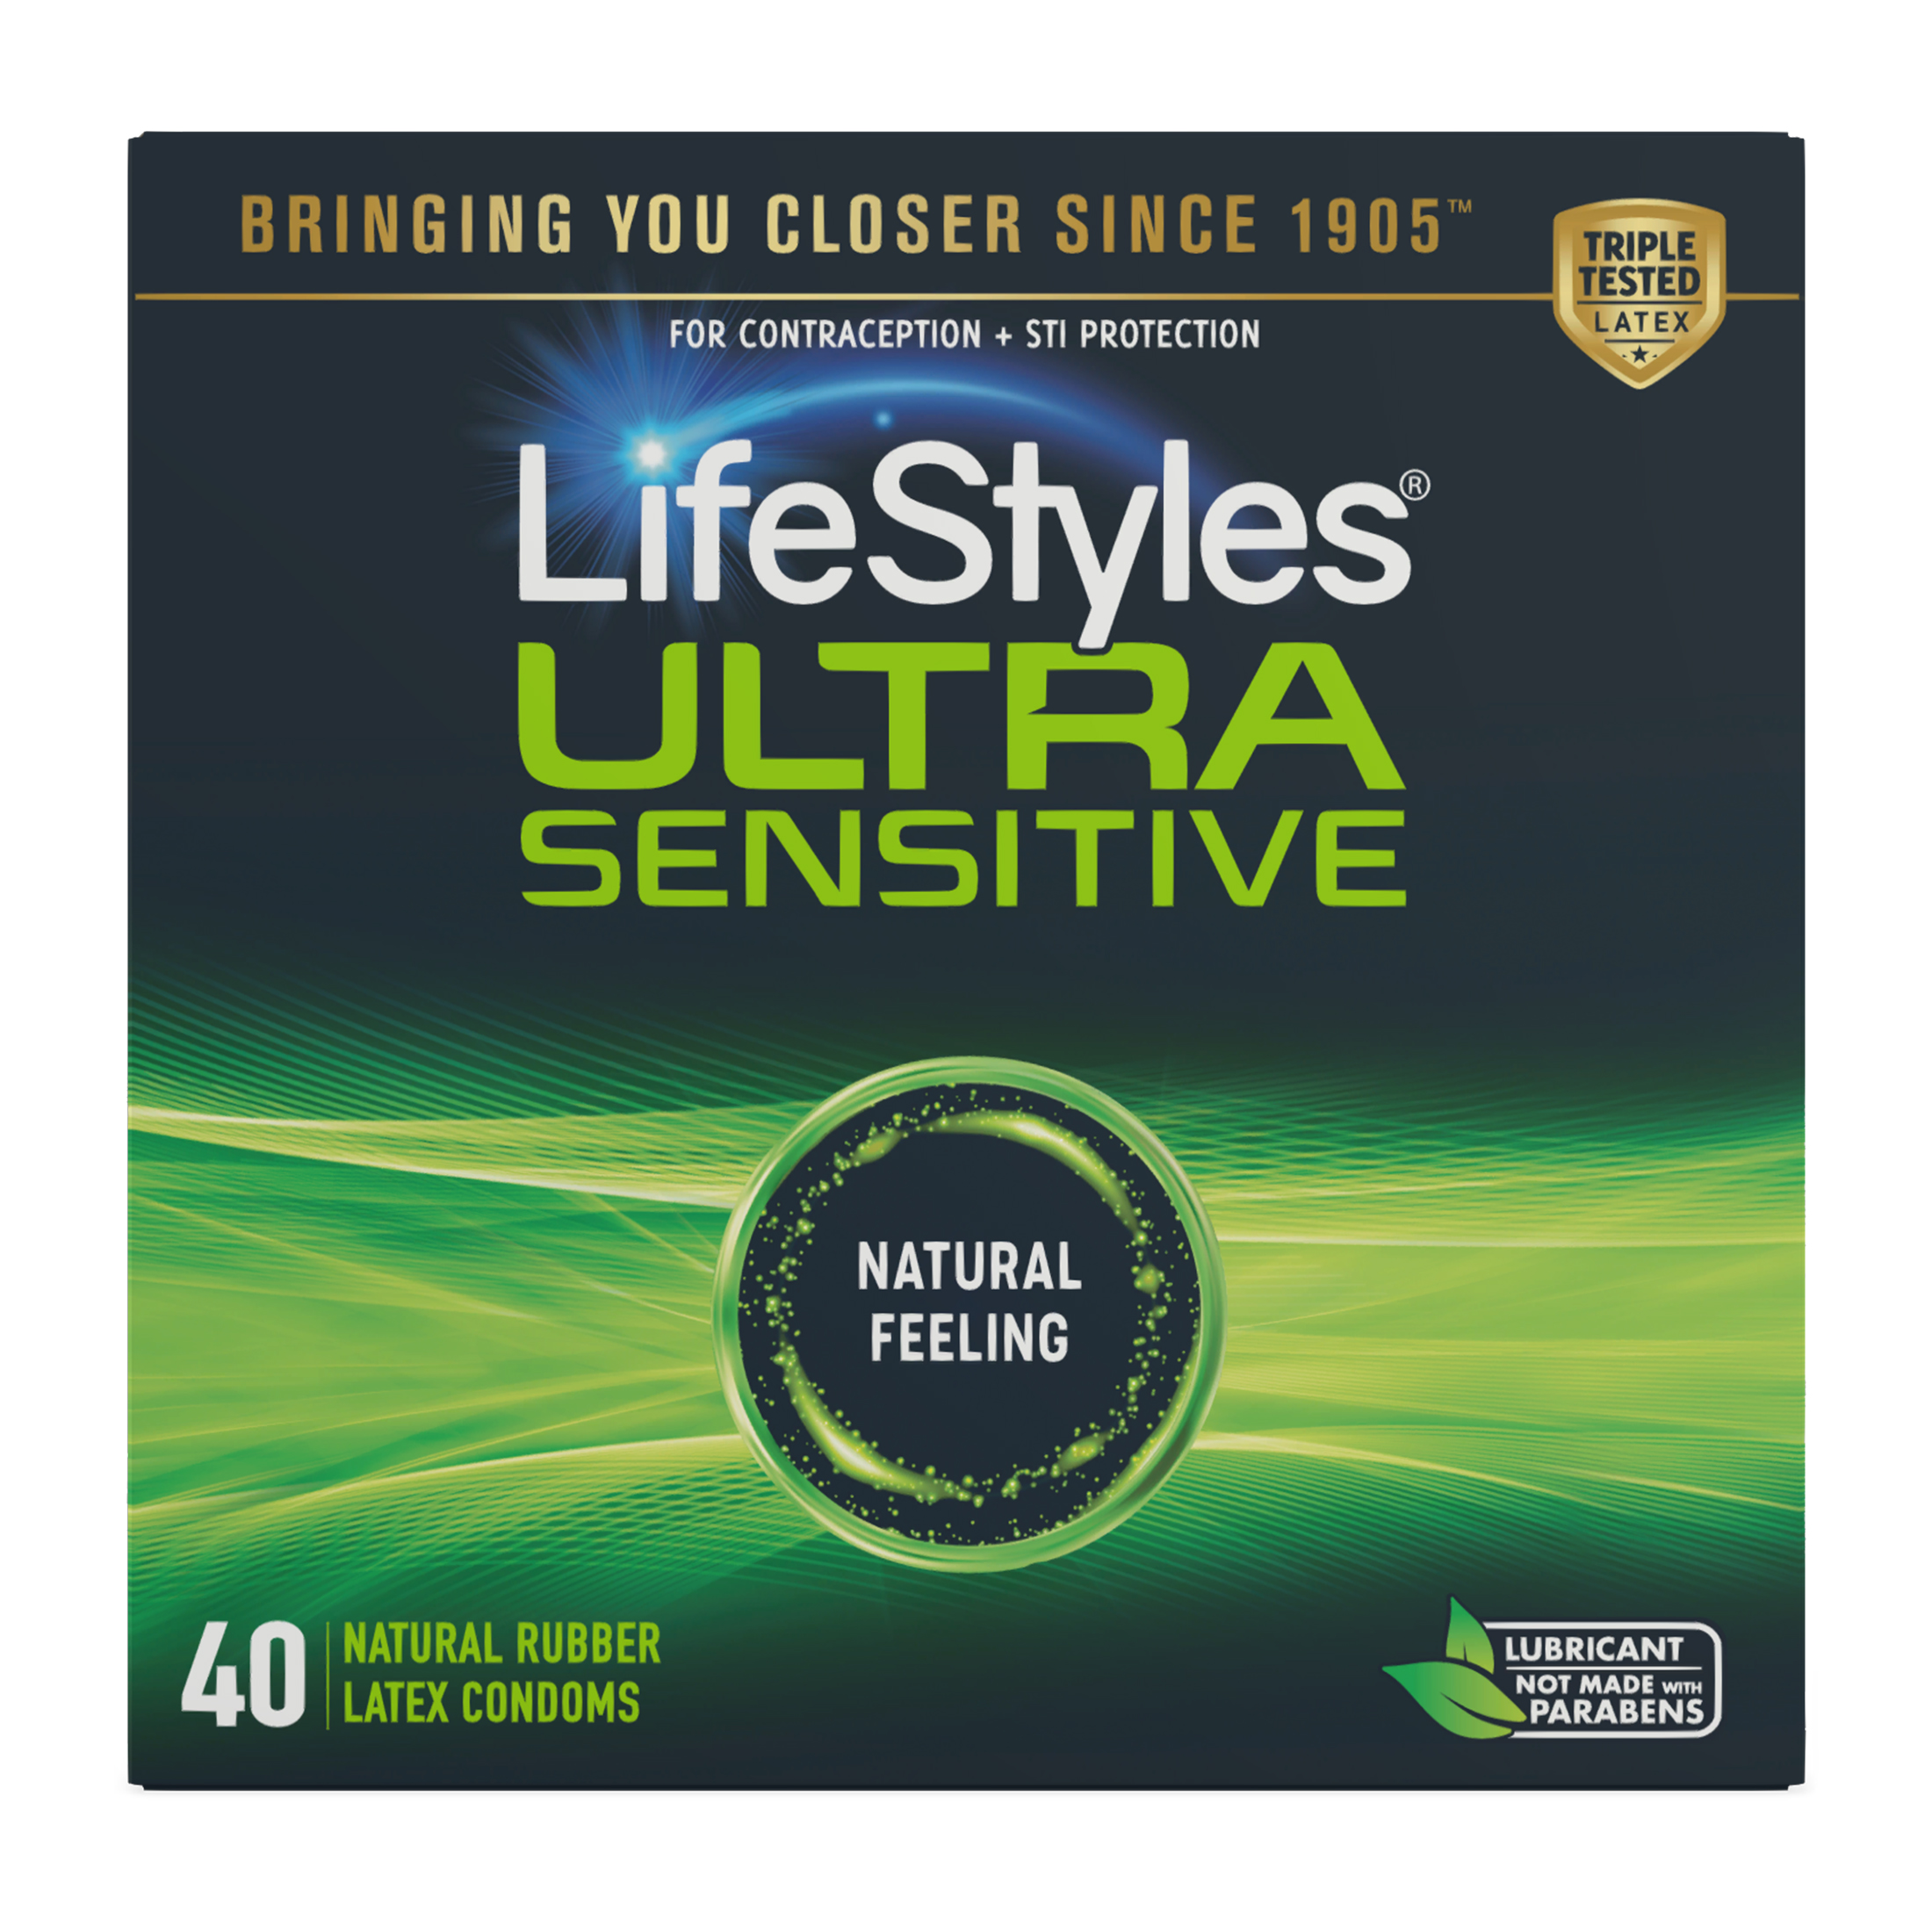 LifeStyles Ultra-Sensitive Lubricated Latex Condoms, 40 Count - image 1 of 7